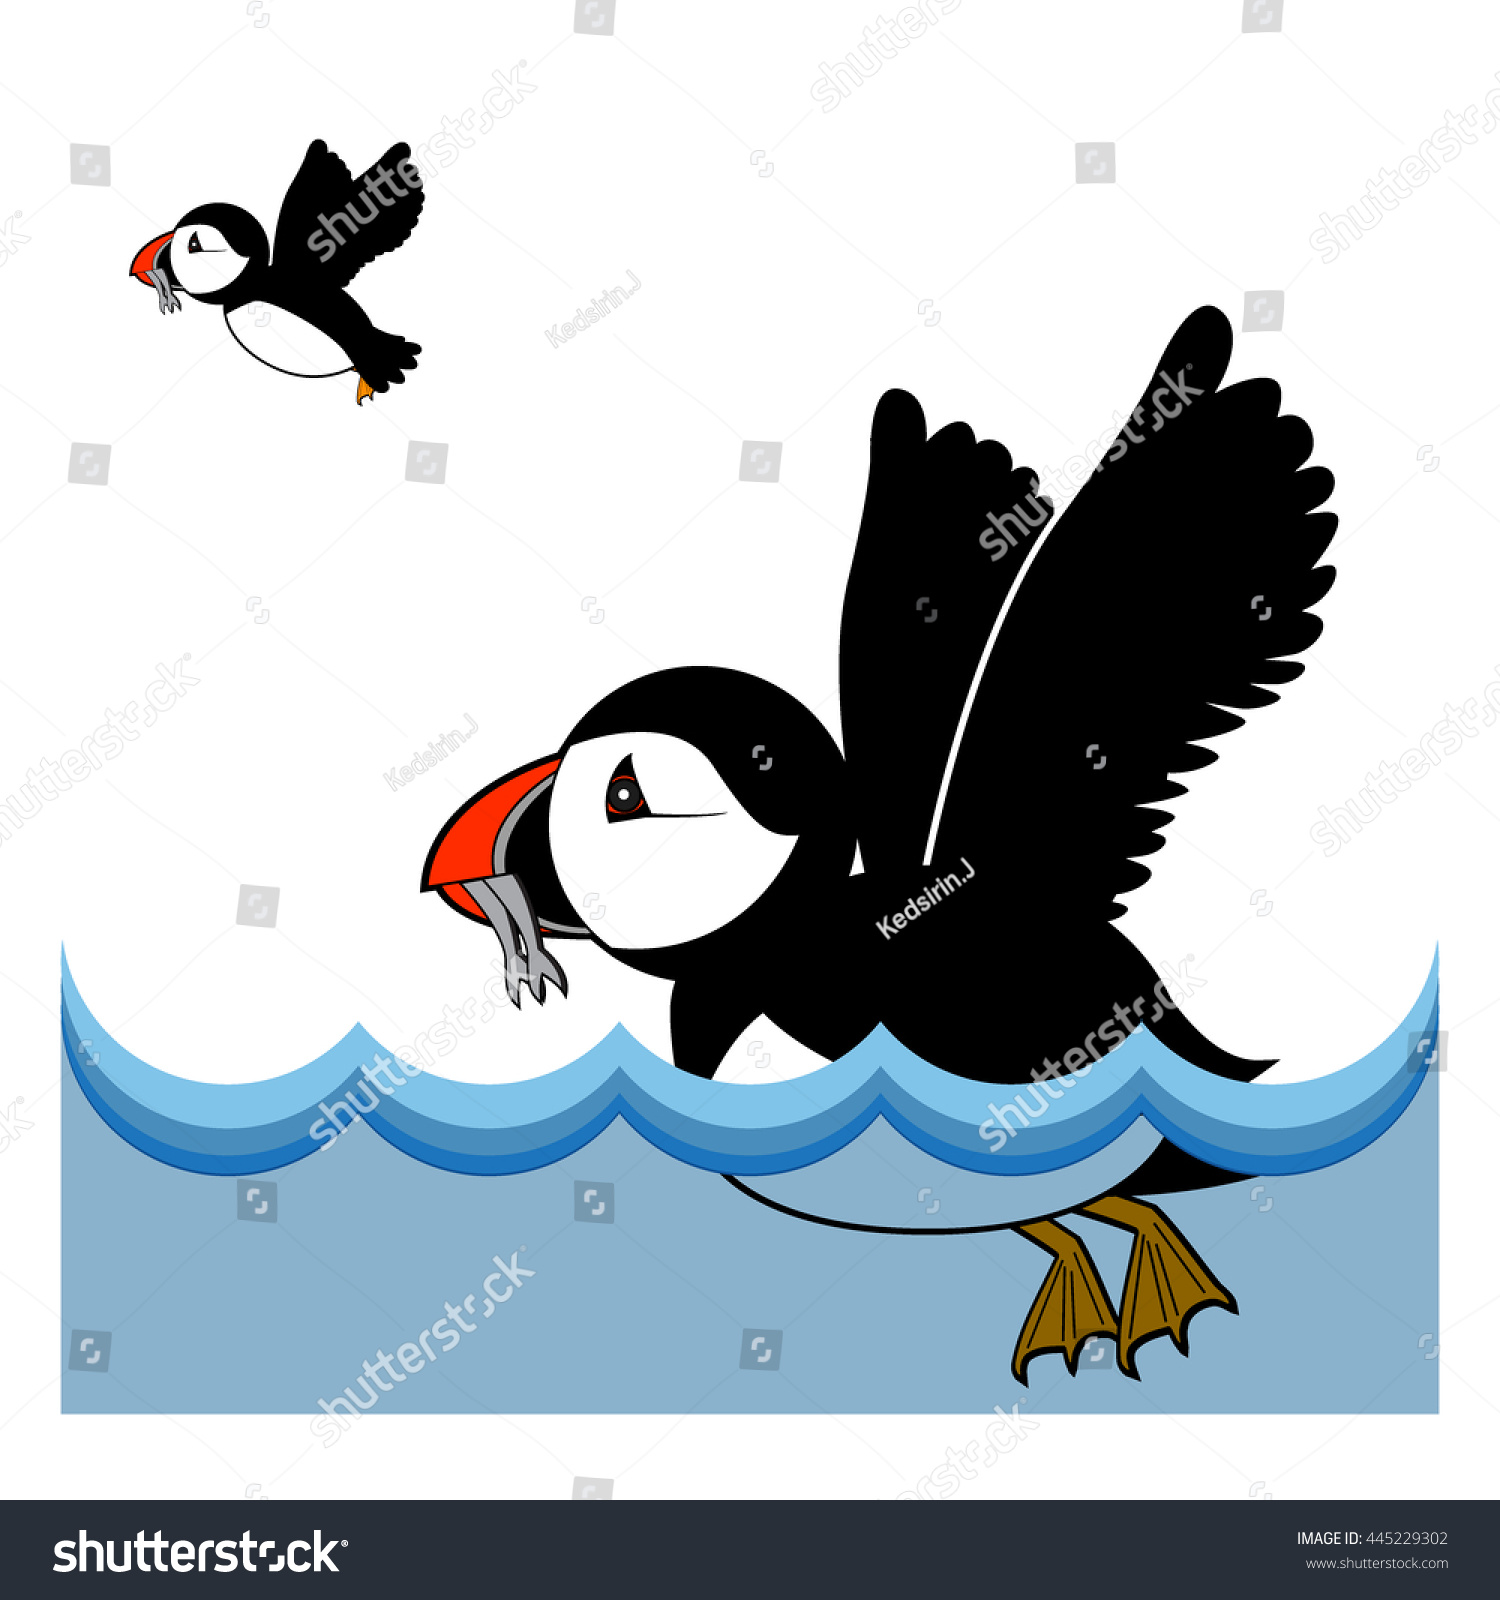 SVG of puffin vector illustration on white background svg